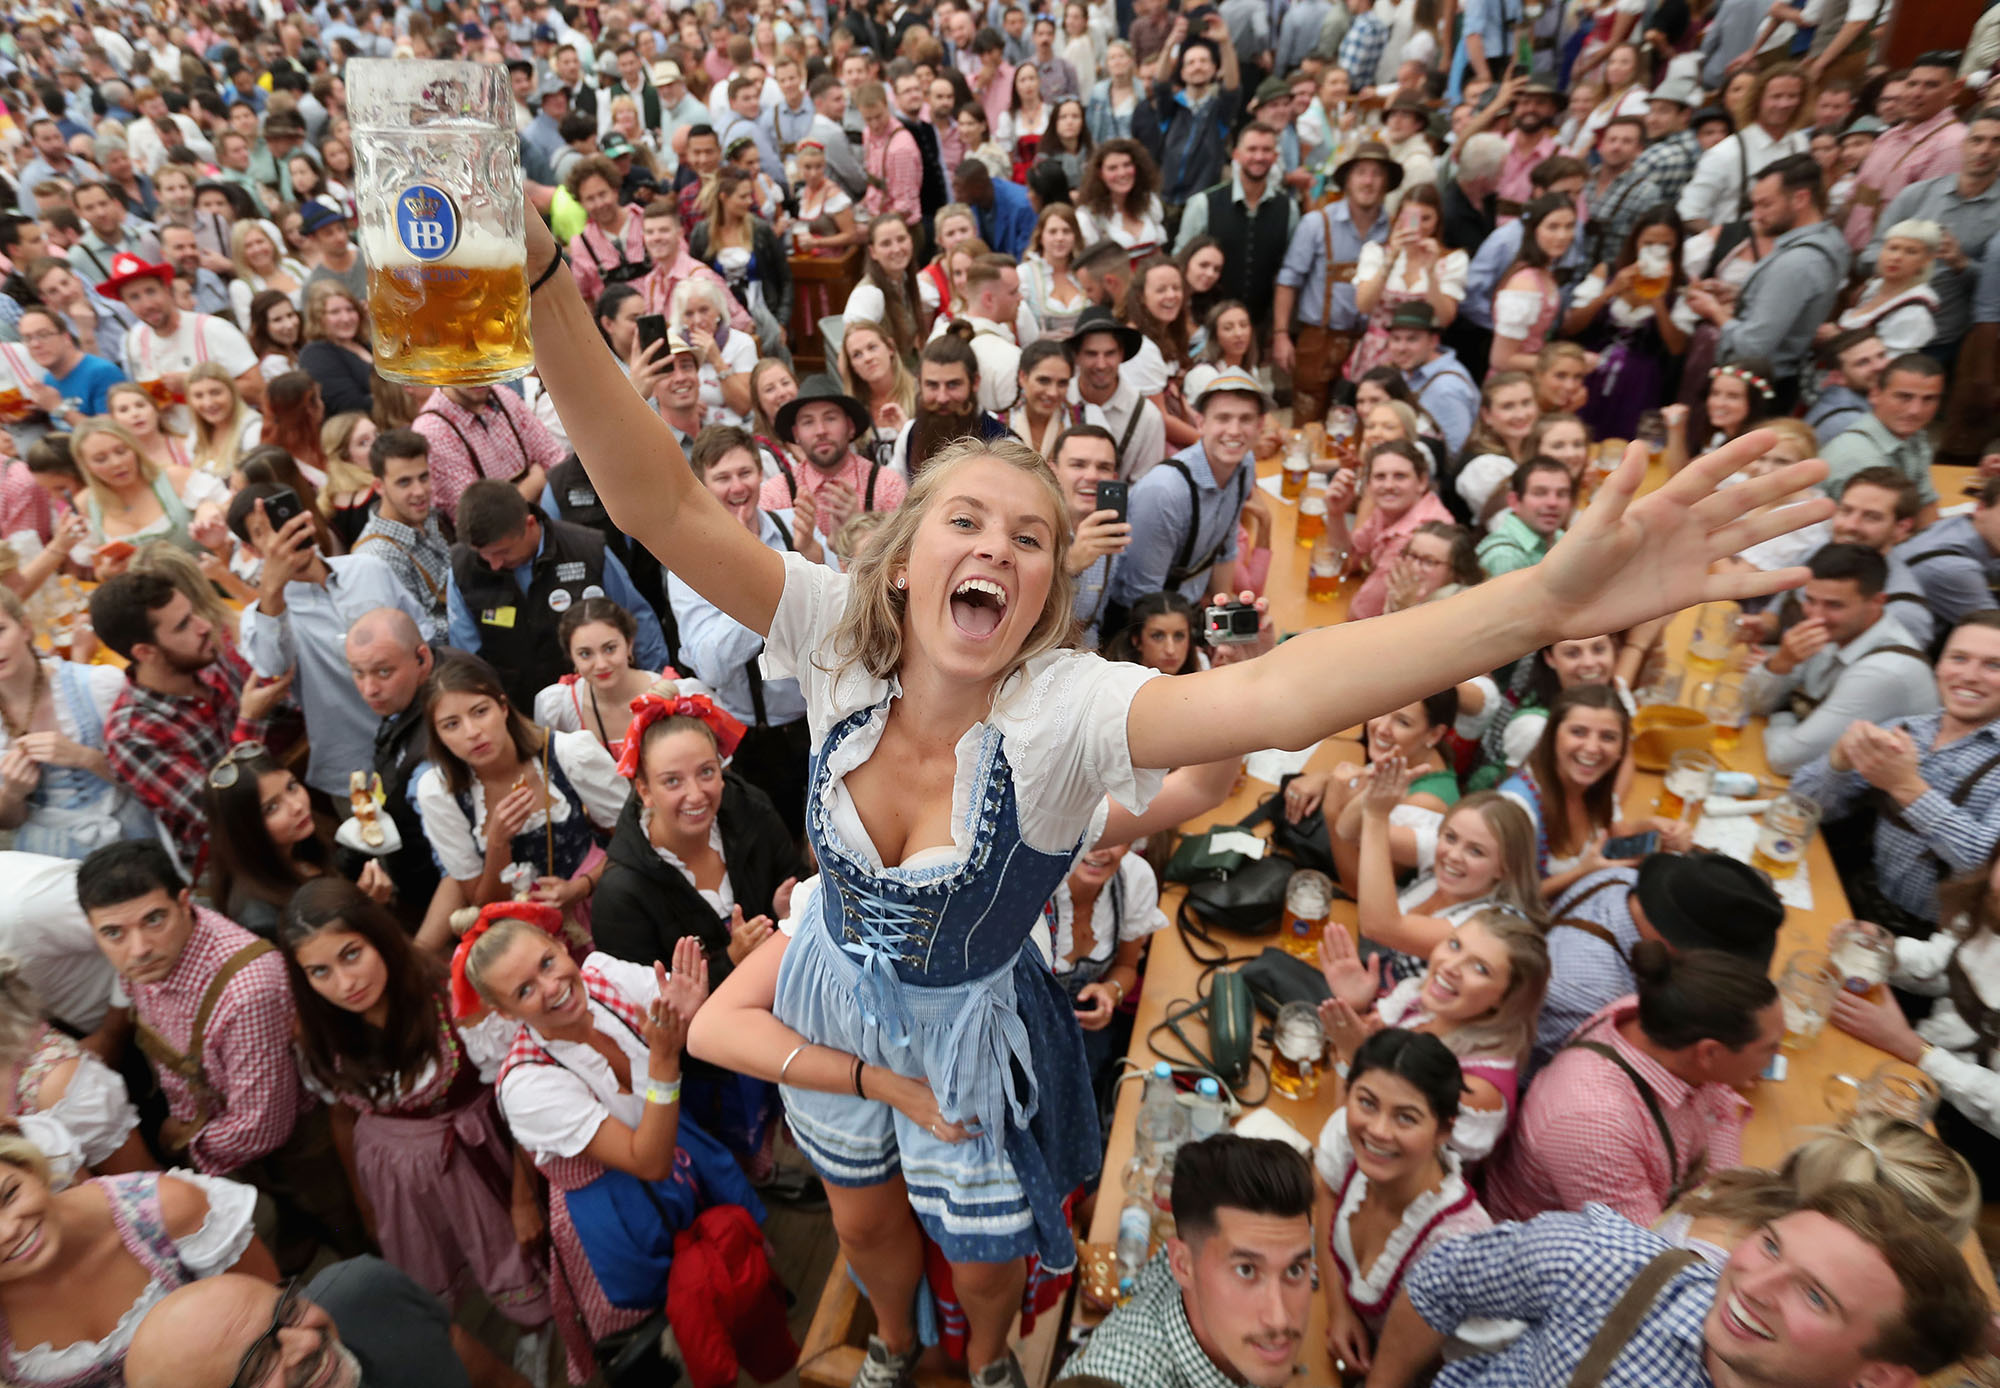 Before you go to Oktoberfest – The Planning Stage